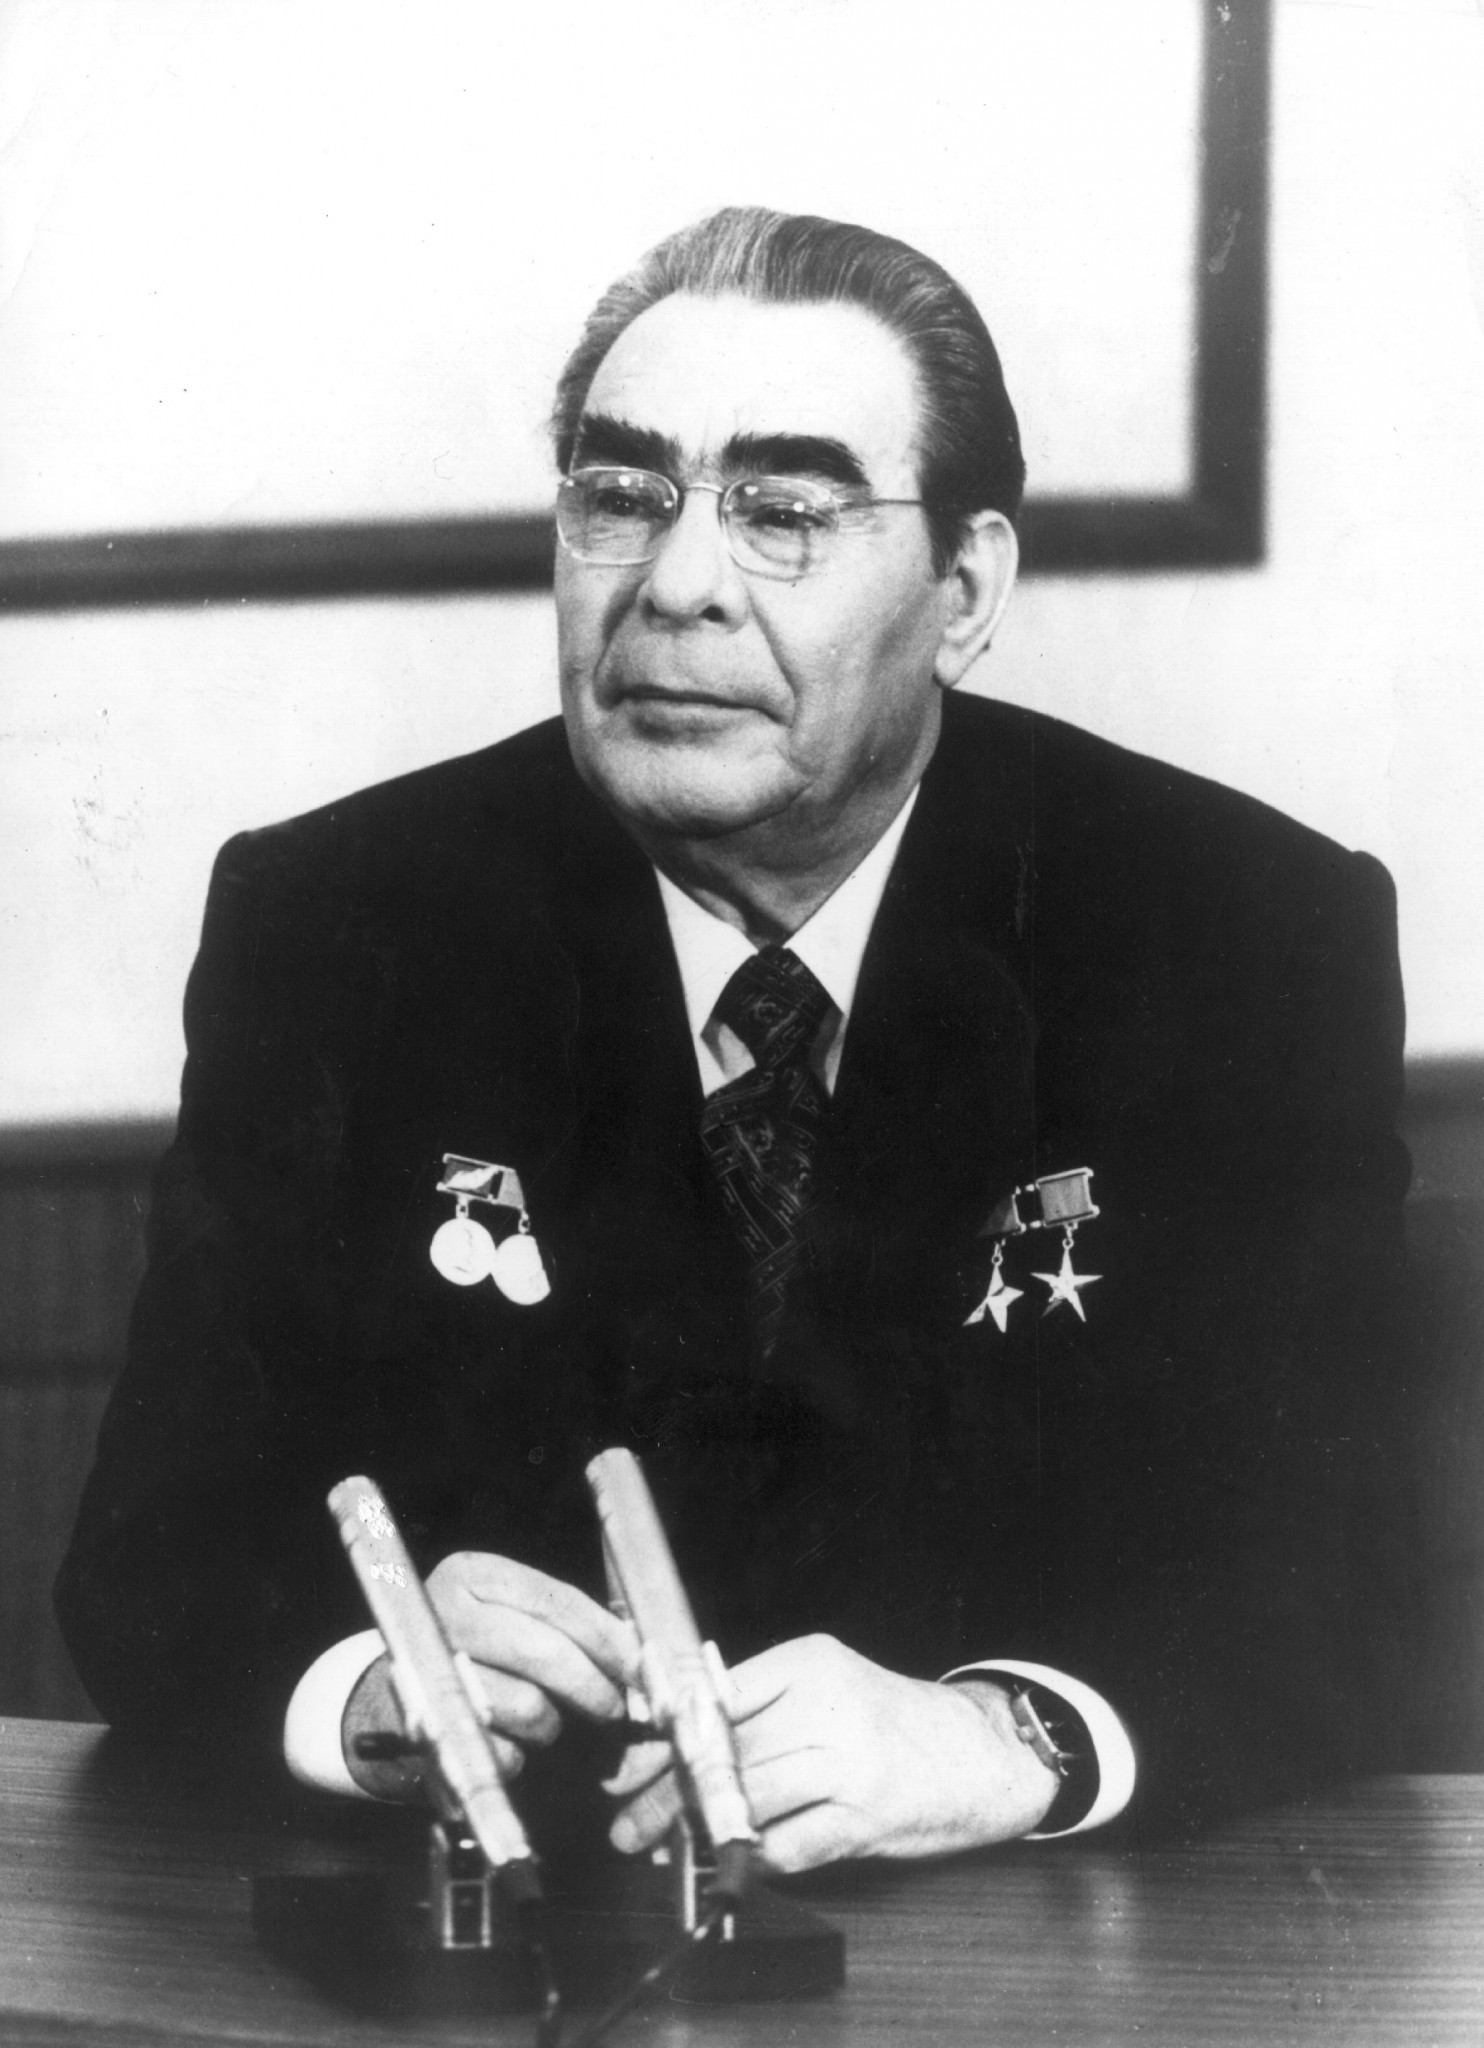 Soviet leader Leonid Brezhnev met IOC President Lord Killanin in 1980 after the American boycott of the Moscow Olympics had been announced ©Getty Images